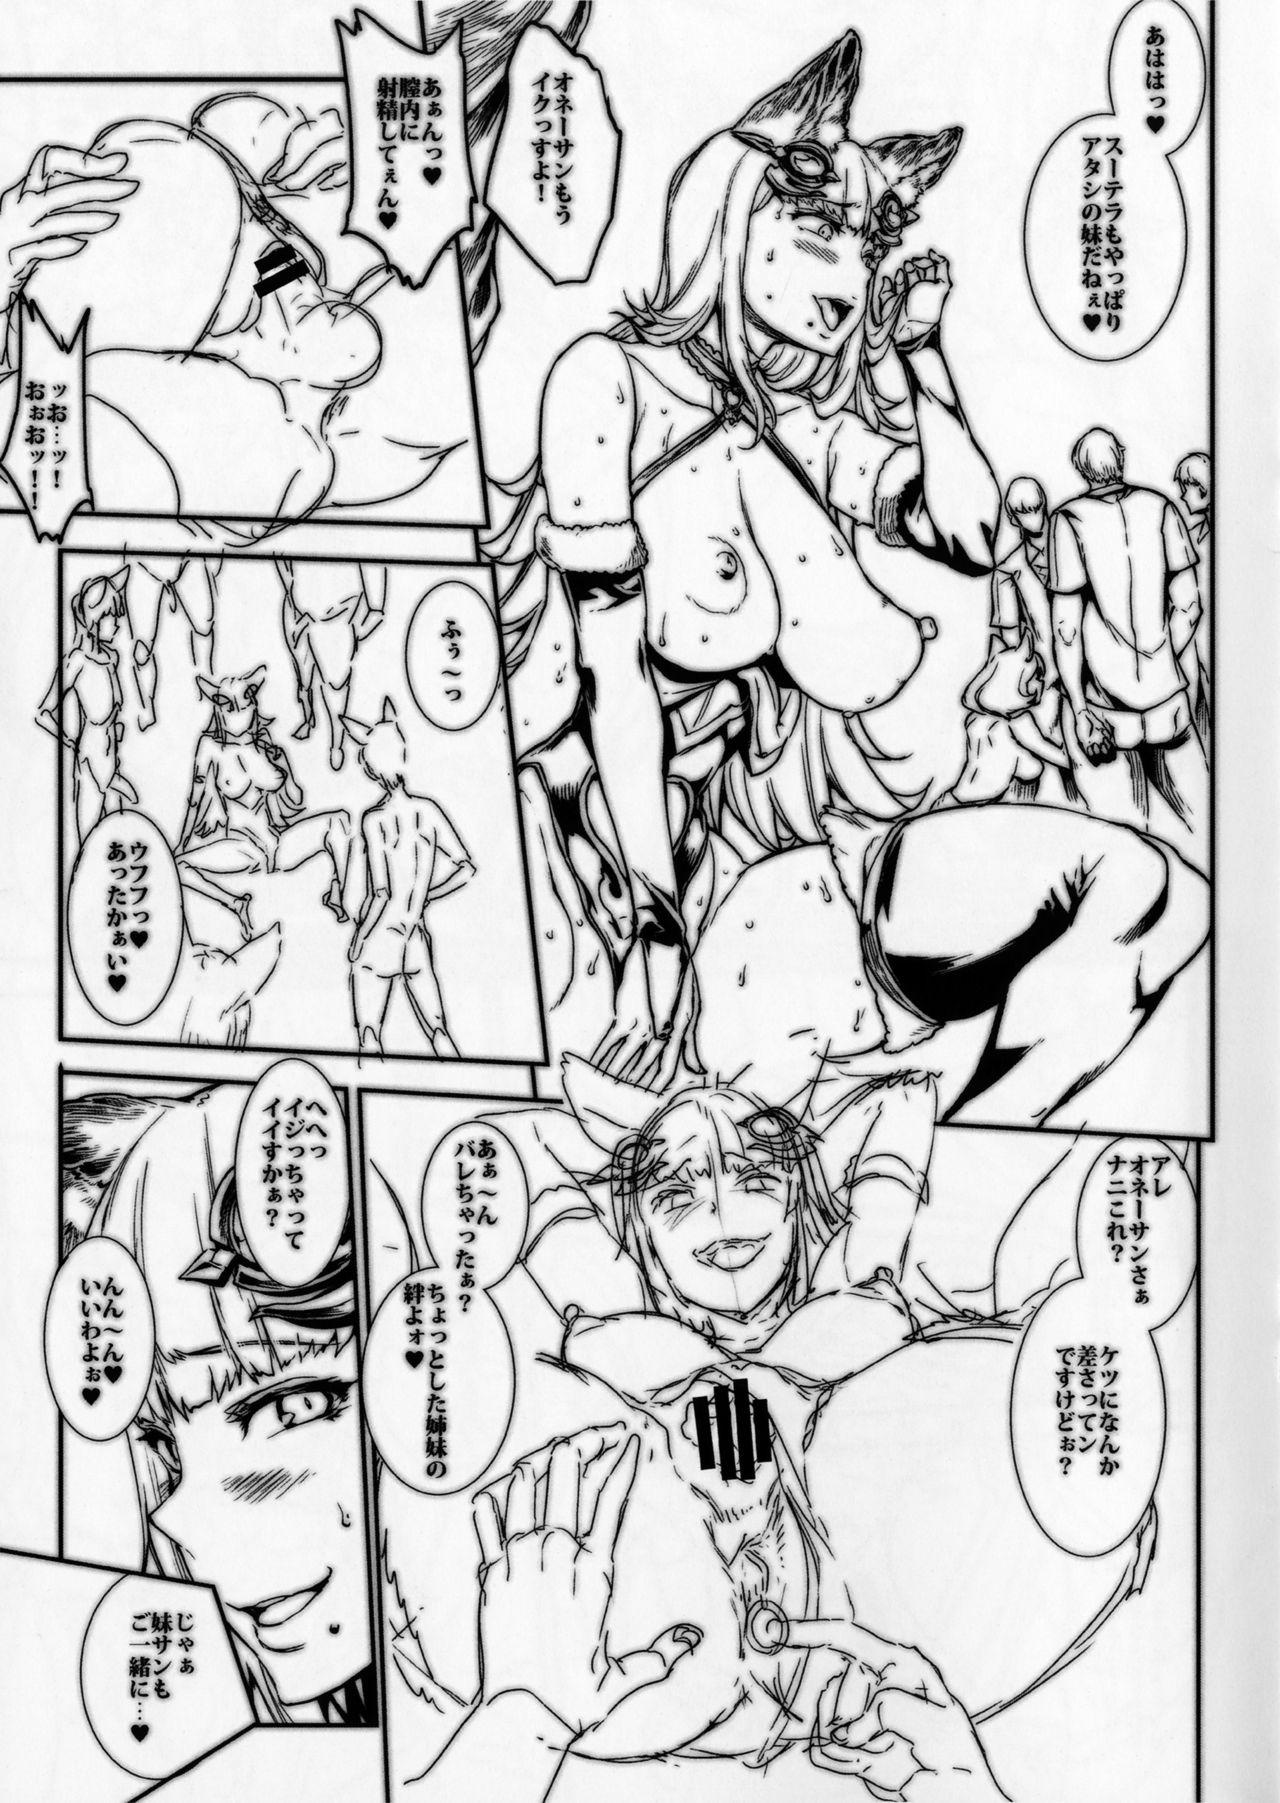 (COMIC1☆10) [ERECT TOUCH (Erect Sawaru)] BITCH & WITCH Preview Ban ＋ Tanzaku Poster (Granblue Fantasy) (COMIC1☆10) [ERECT TOUCH (エレクトさわる)] BITCH & WITCH プレビュー版 + 短冊ポスター (グランブルーファンタジー)